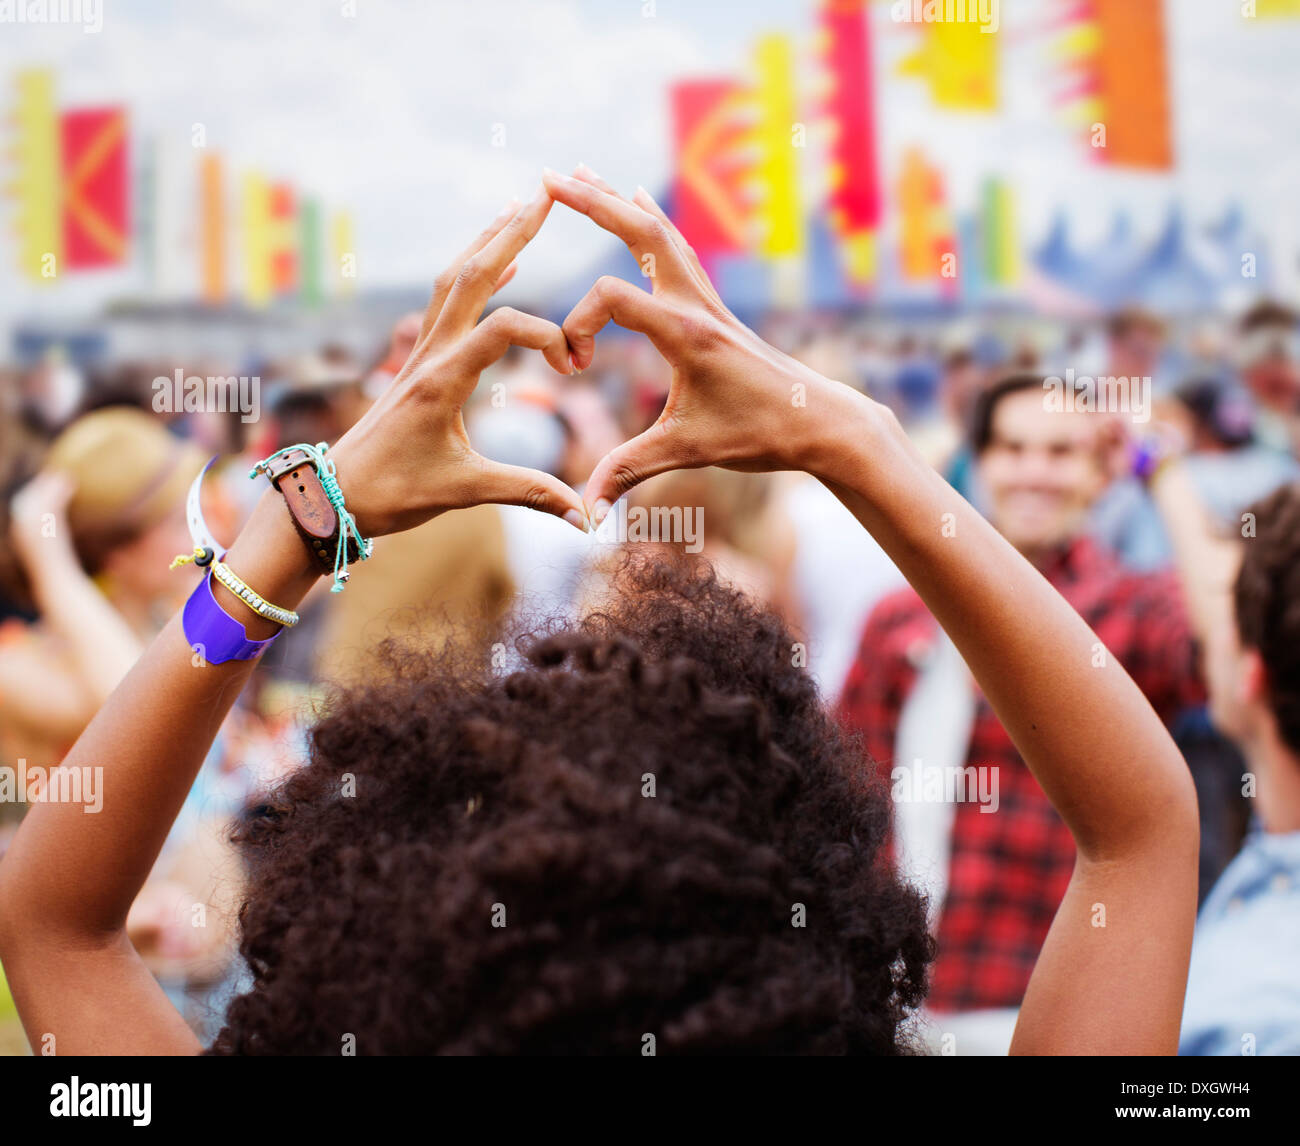 Woman forming heart-shape with hands at music festival Stock Photo